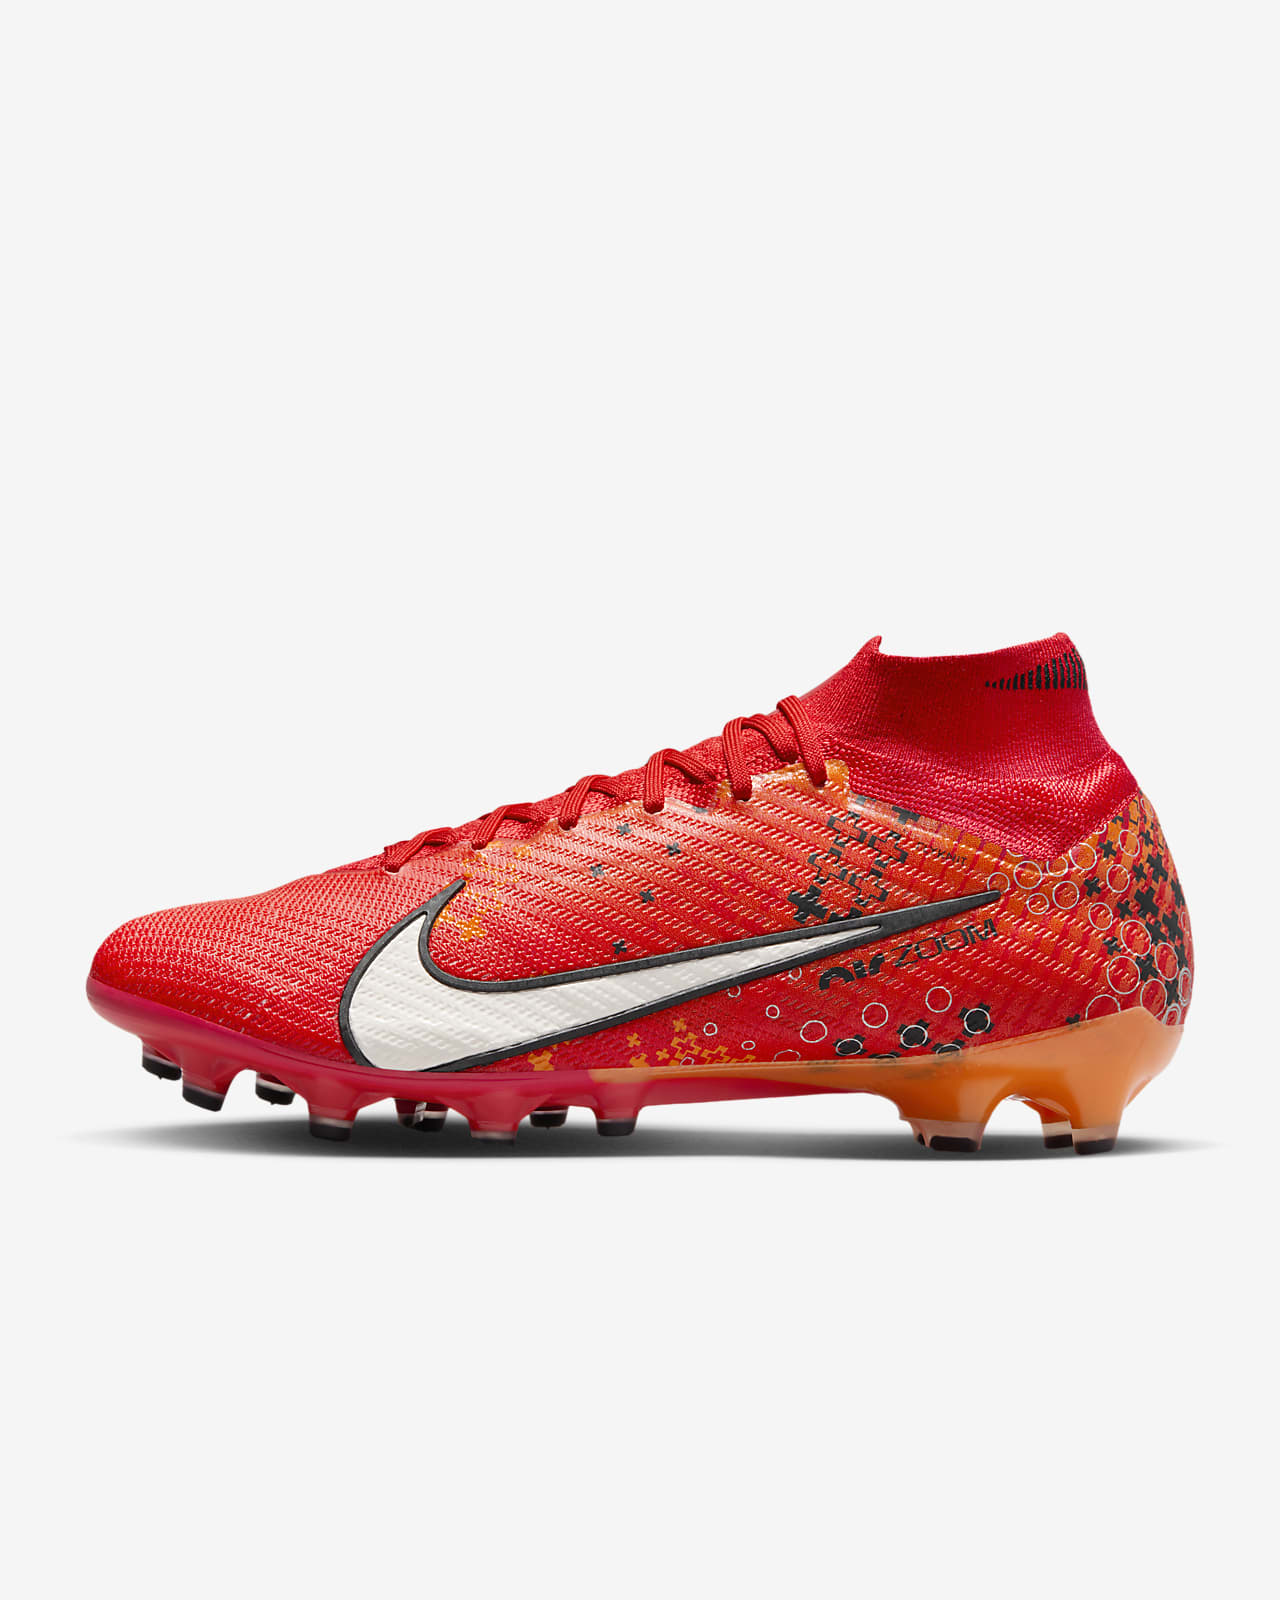 Nike Superfly 9 Elite Mercurial Dream Speed AG-Pro High-Top Soccer Cleats